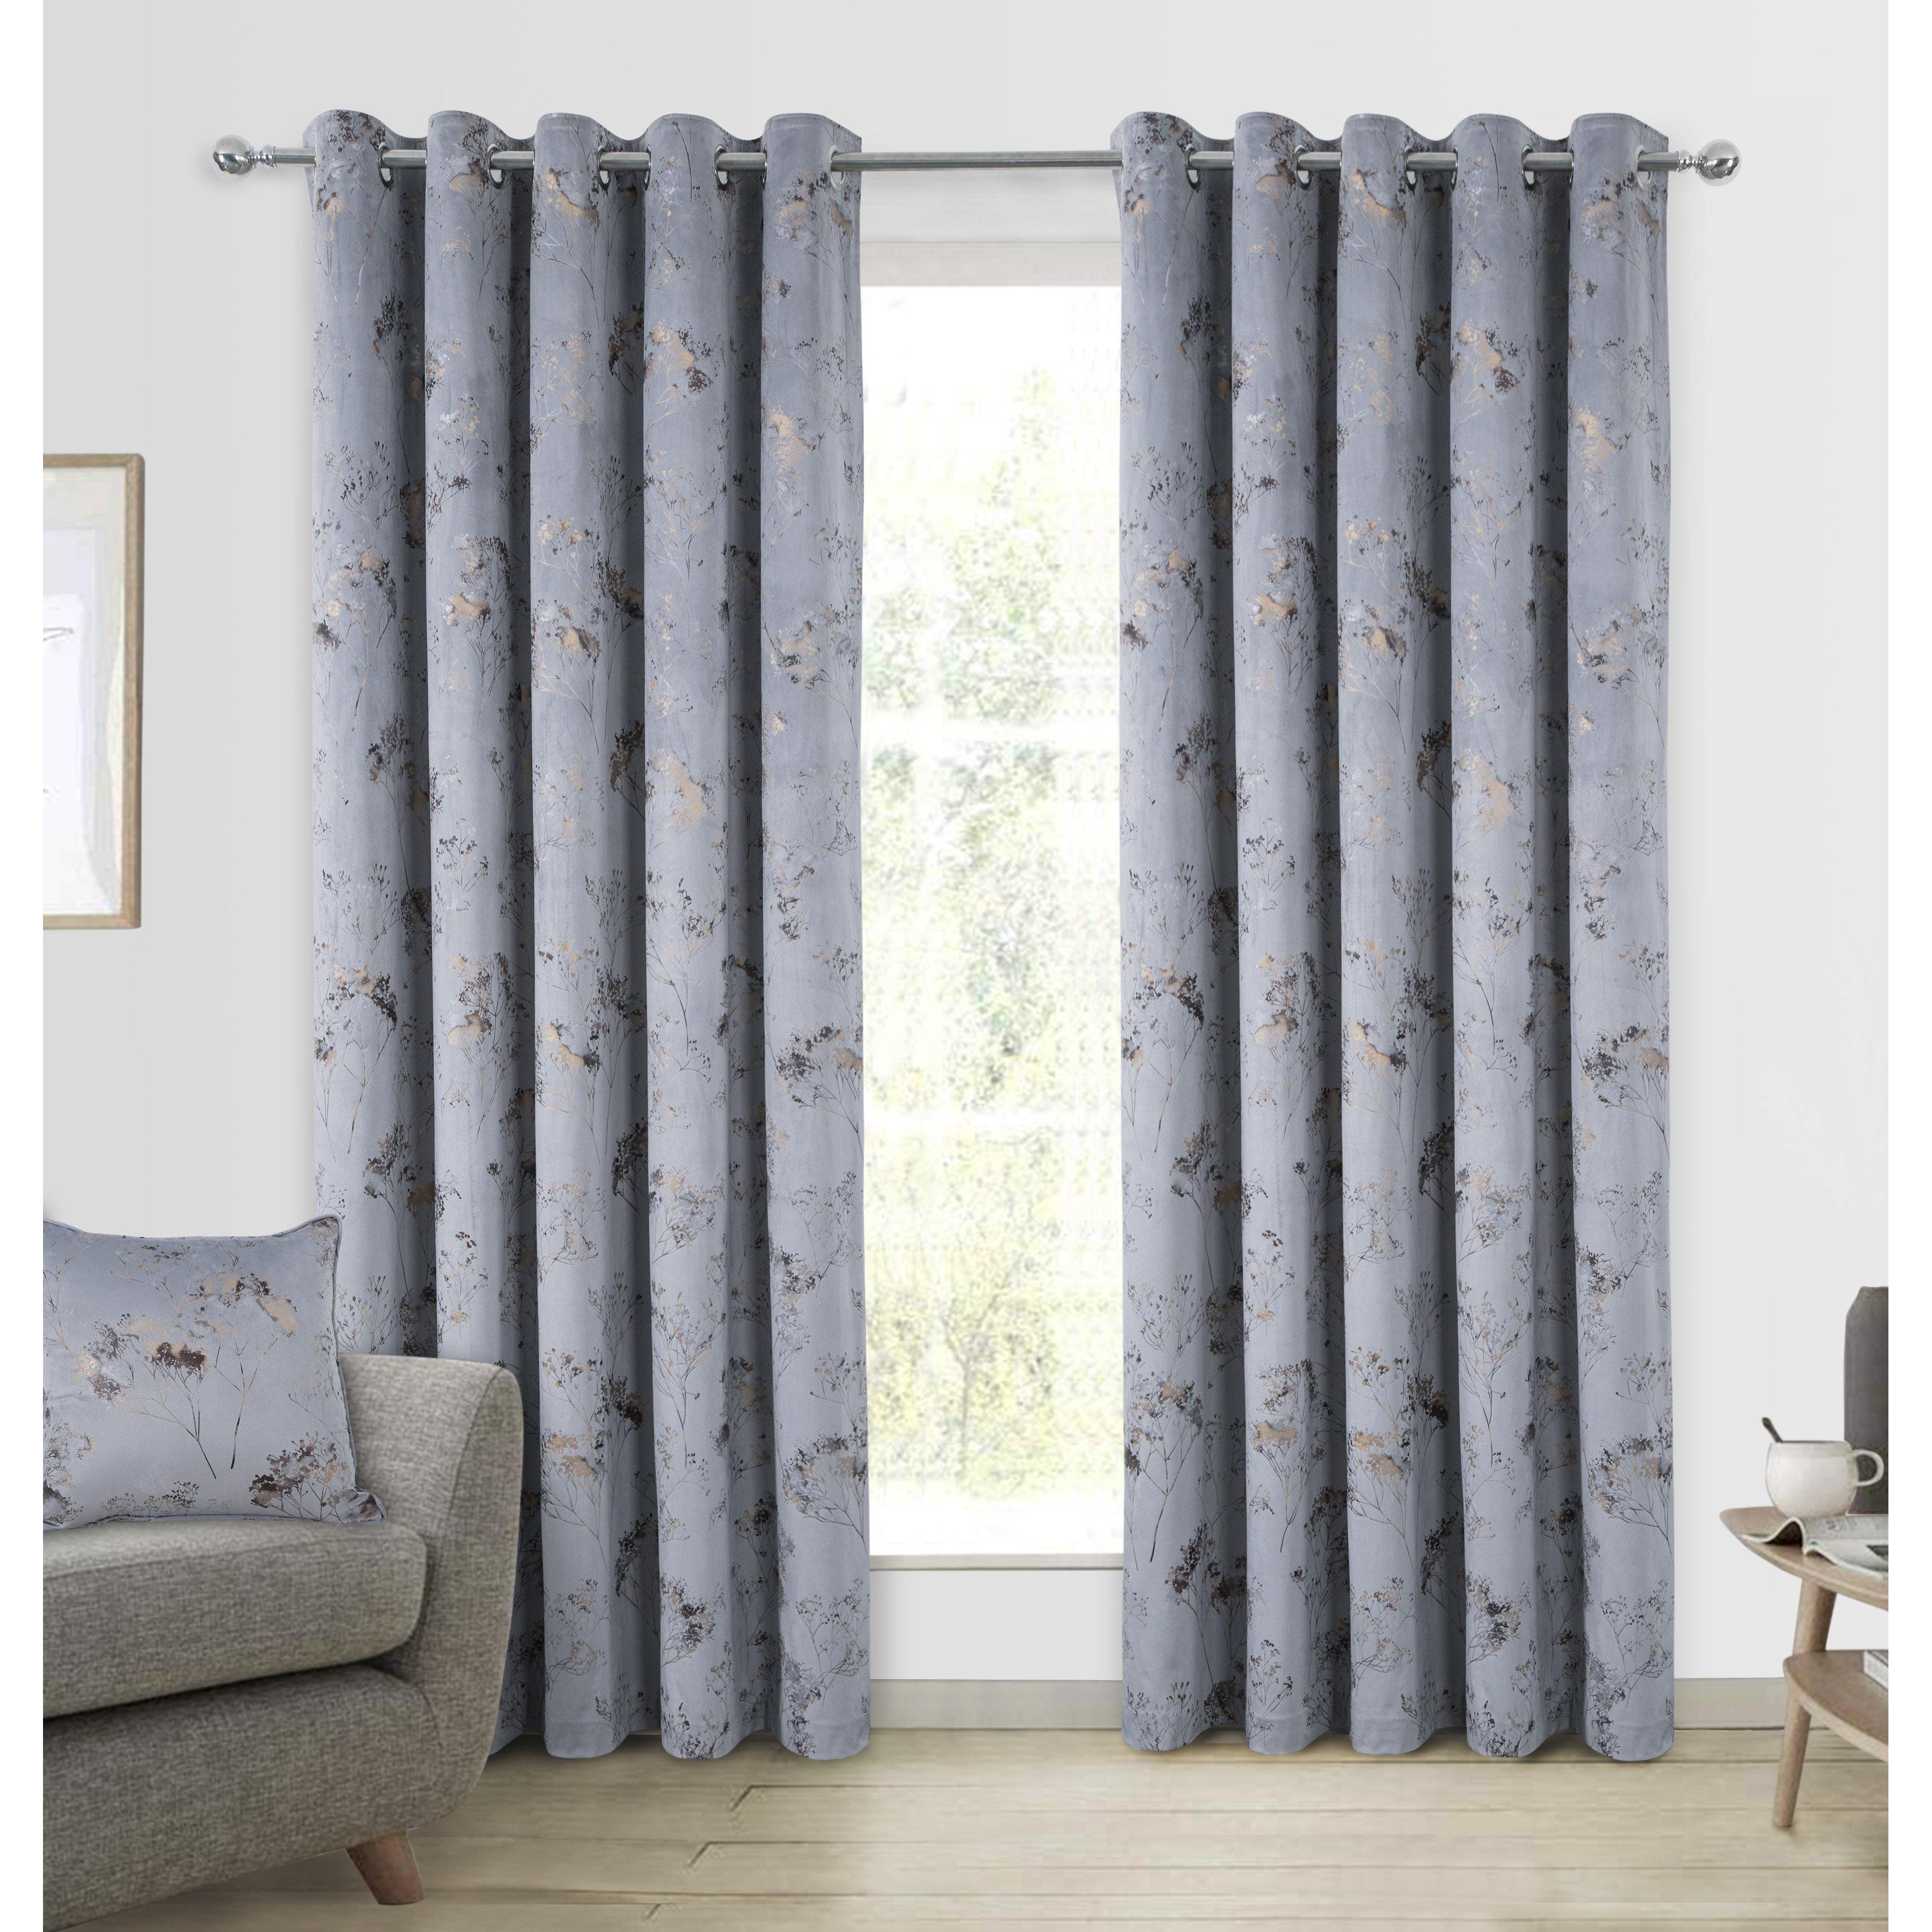 Lucia Floral Thermal Interlined Eyelet Curtains pair - image 1